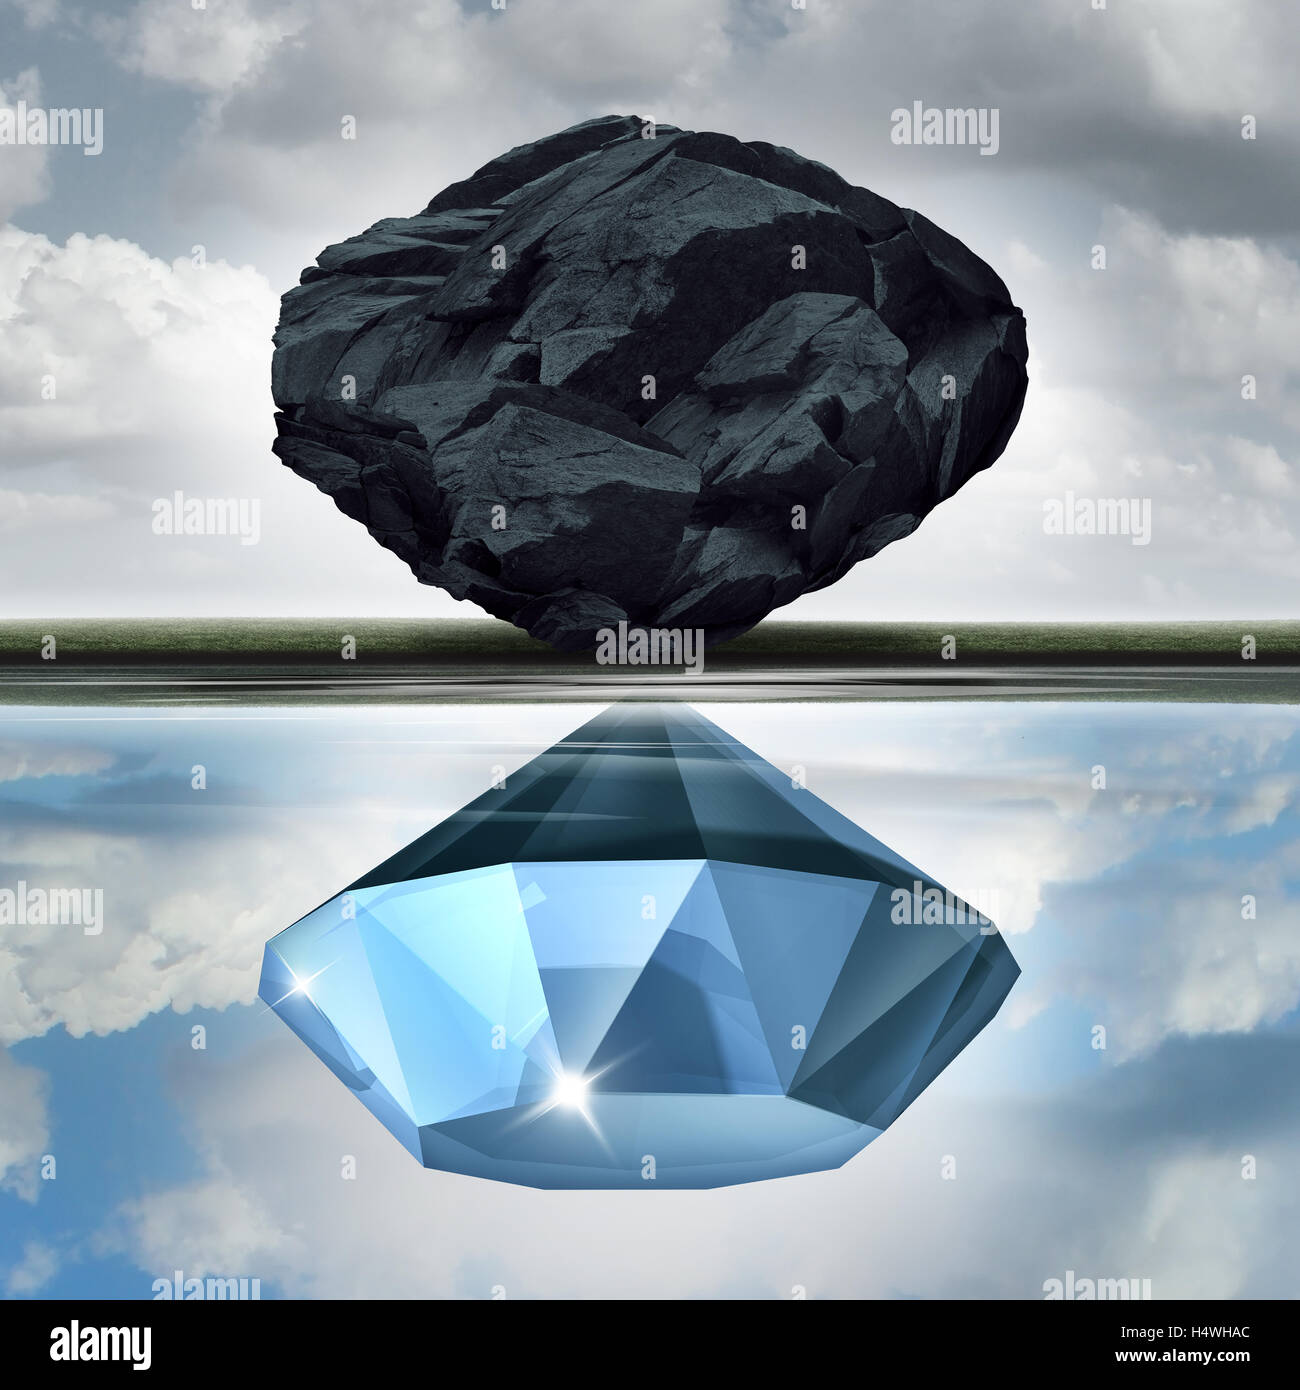 Valuation vision seeing the possibilities of value opportunity as a wealth financial visualization concept as a rock or coal making a reflection in the water of a precious diamond with 3D illustration elements. Stock Photo